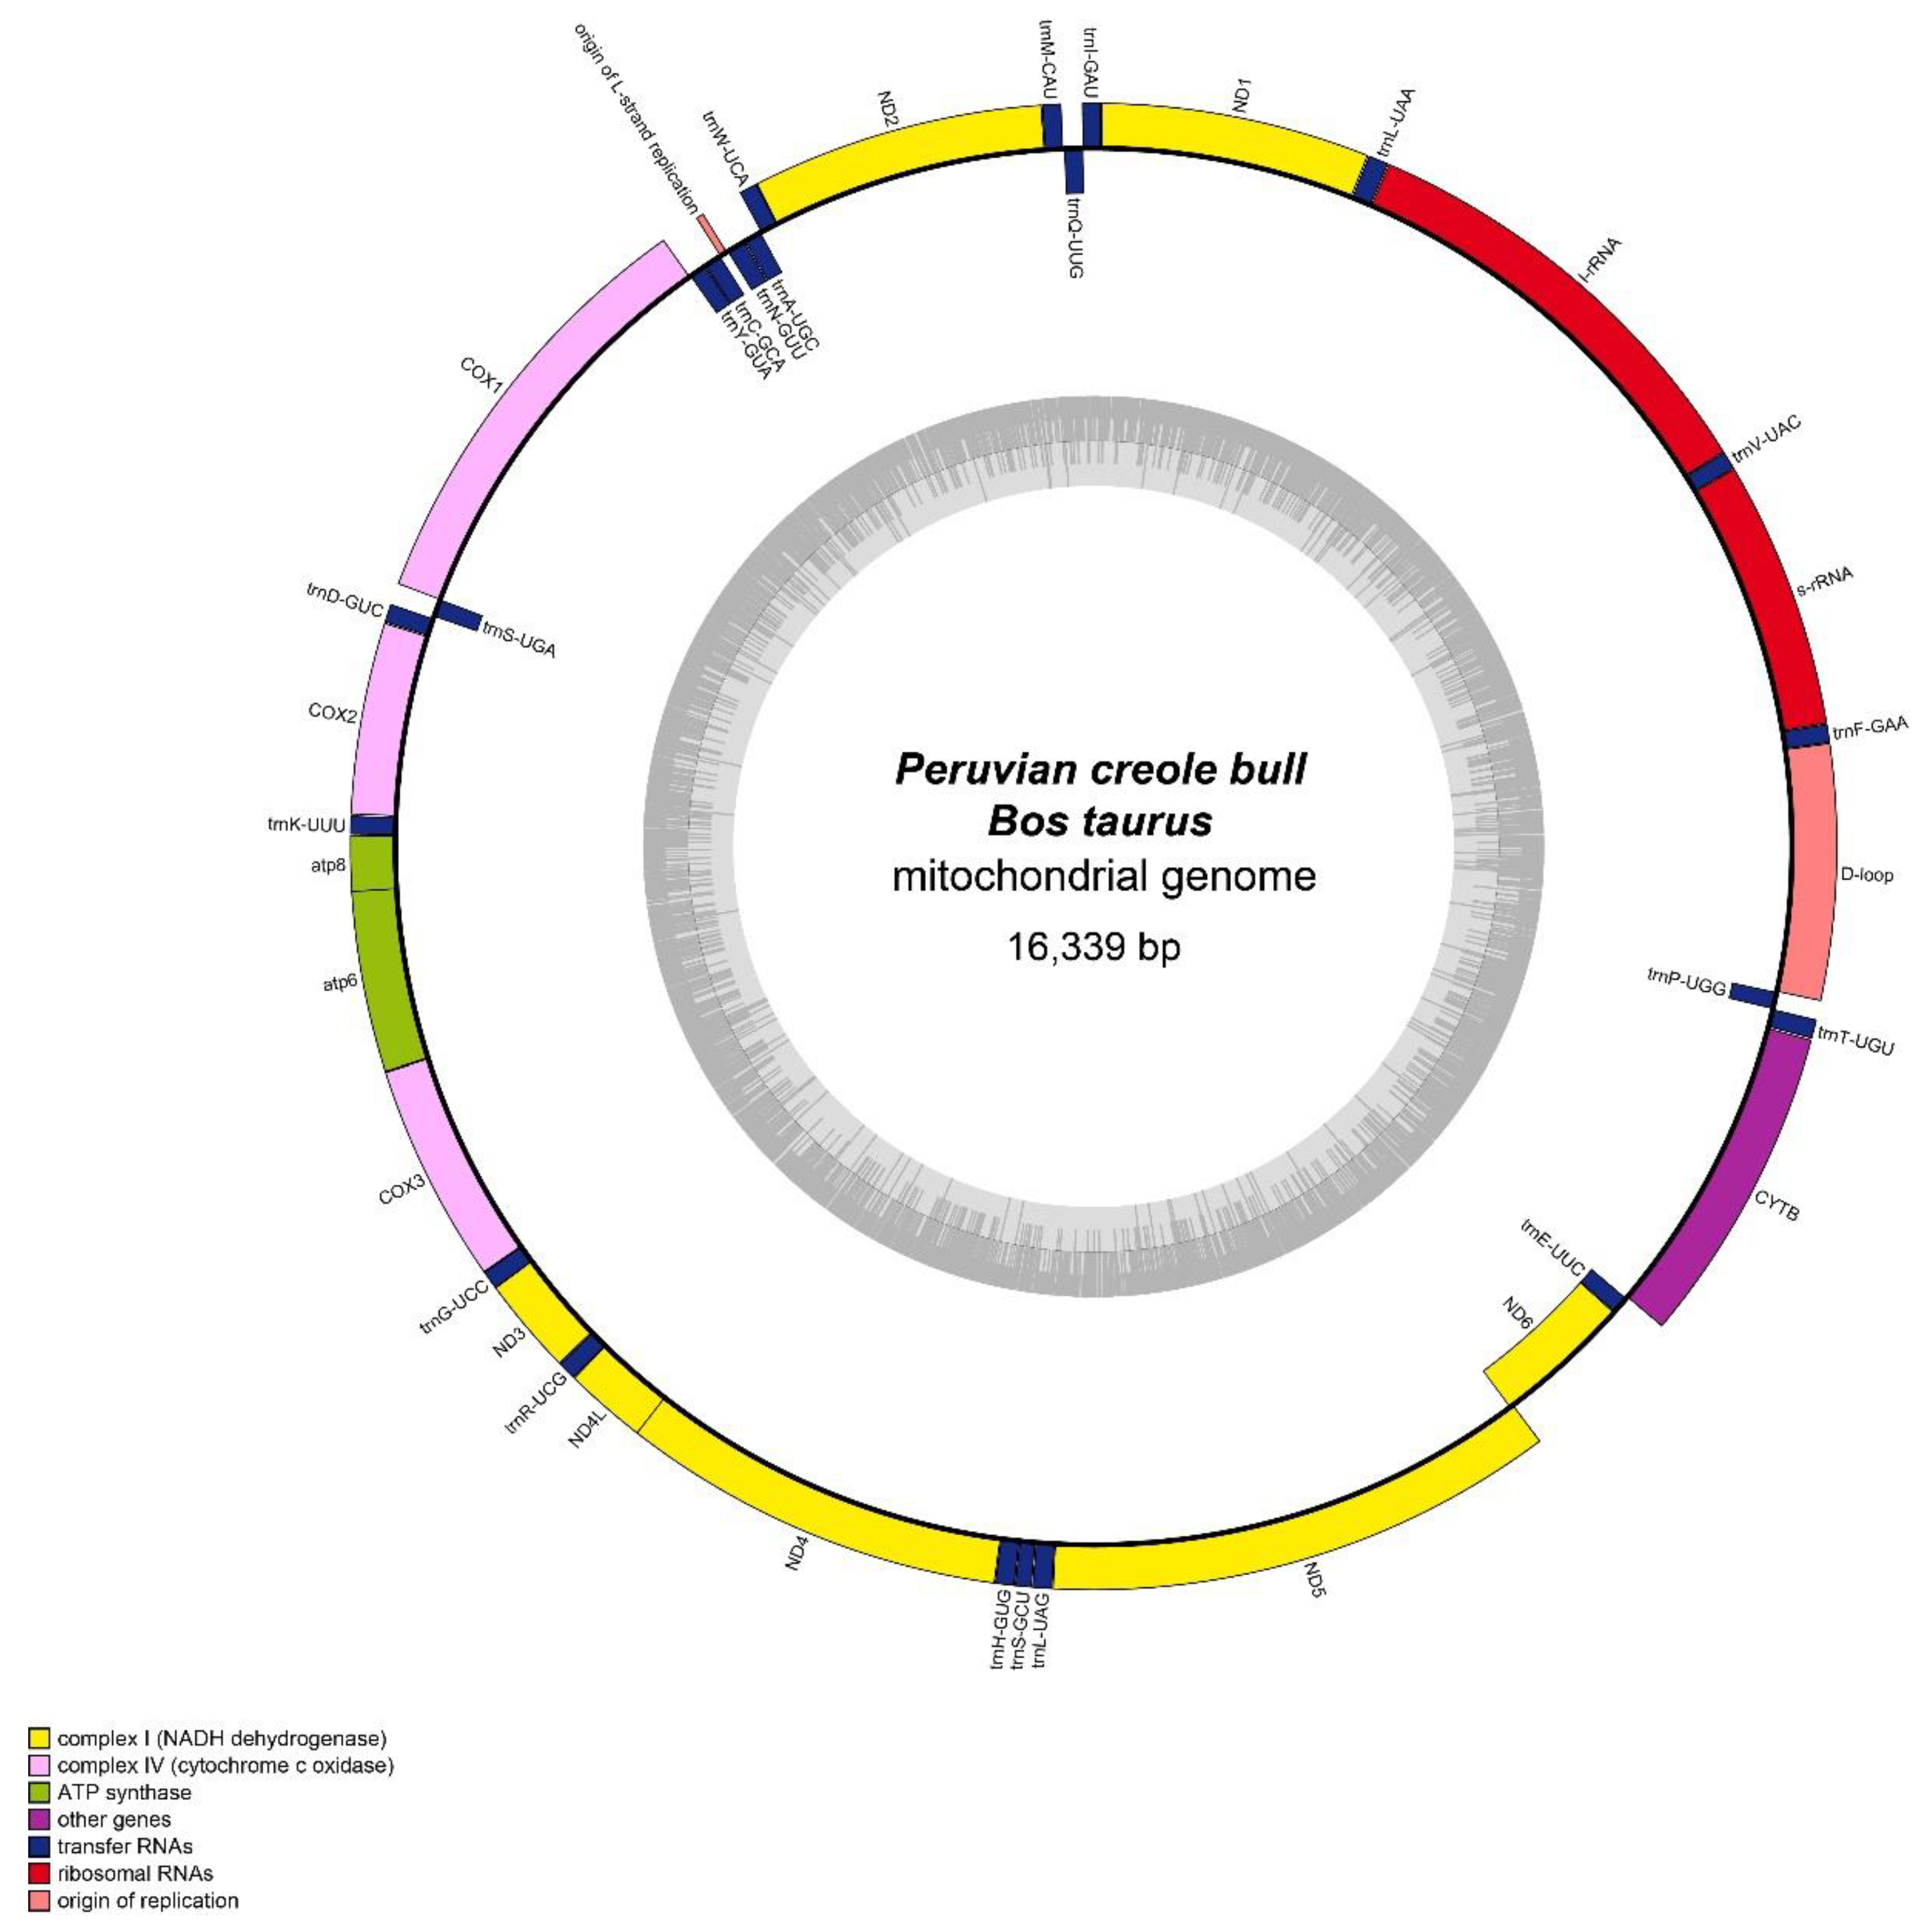 Regn faldskærm Hover Data | Free Full-Text | The Complete Mitochondrial Genome of a Neglected  Breed, the Peruvian Creole Cattle (Bos taurus), and Its Phylogenetic  Analysis